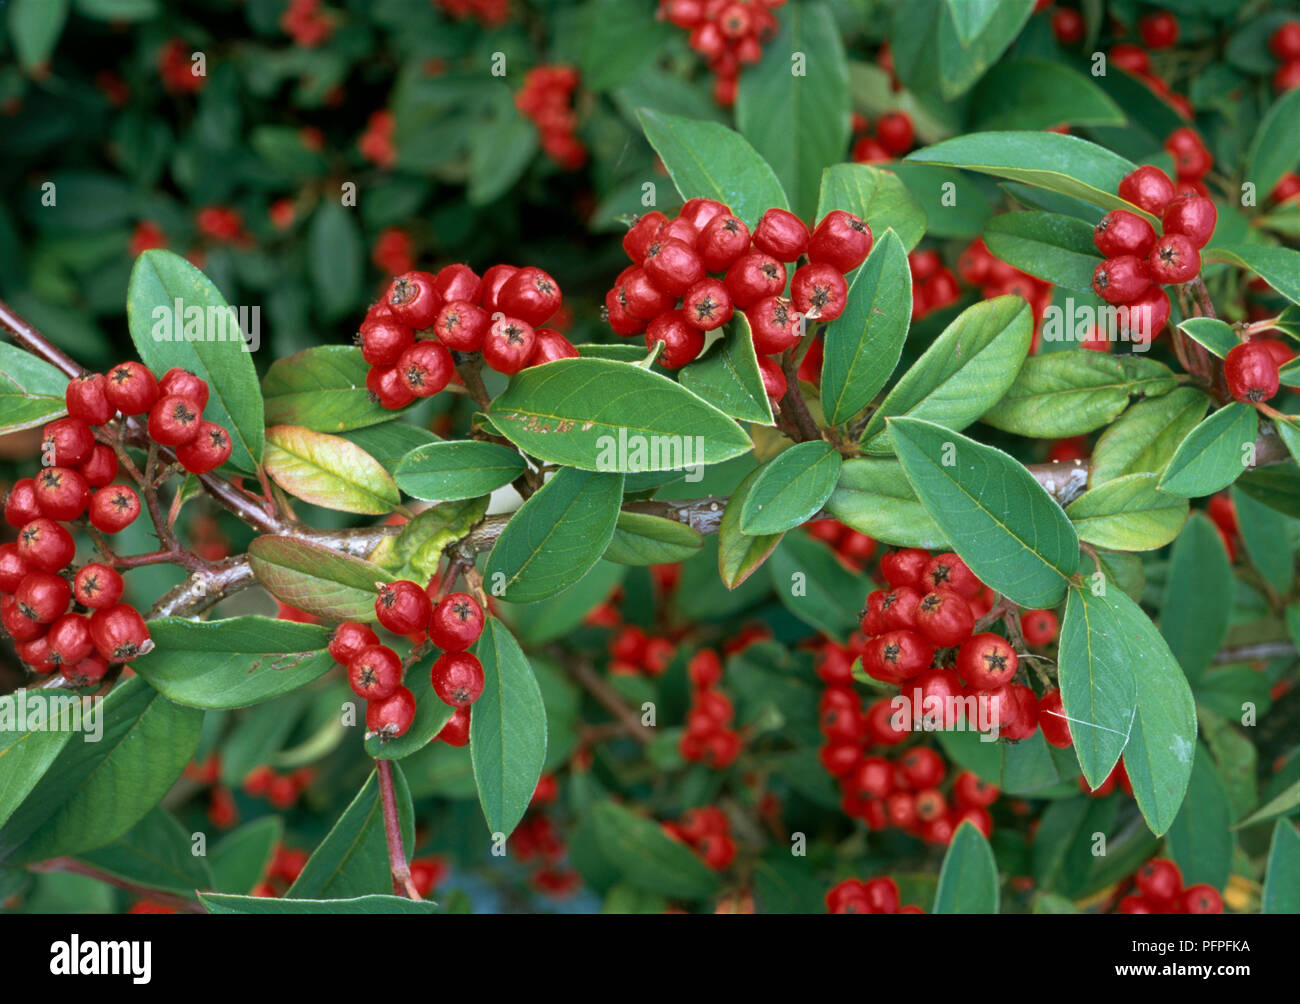 Cotoneaster 'Hybridus Pendulus' (Cotoneaster Tree), clusters of red berries, and green leaves on branch, close-up Stock Photo